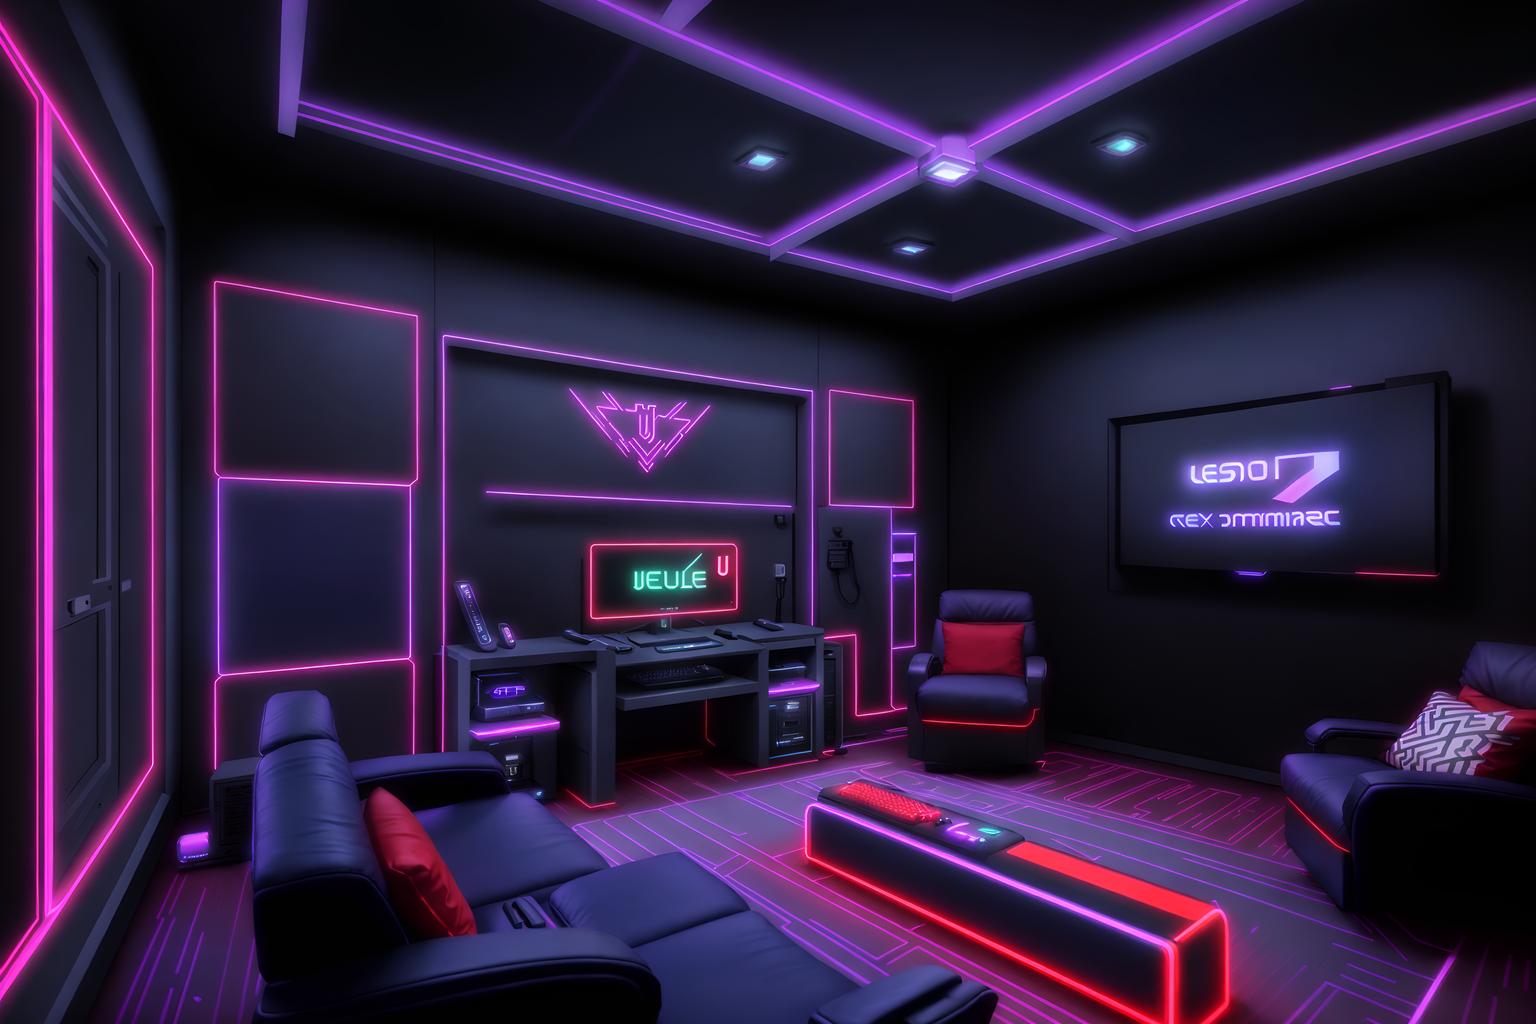 gaming room-style exterior designed (house exterior exterior) . with purple, red and blue fade light and neon lights and at night and computer desk with computer displays and keyboard and neon letters on wall and dark walls and multiple displays and purple and red lights. . cinematic photo, highly detailed, cinematic lighting, ultra-detailed, ultrarealistic, photorealism, 8k. gaming room exterior design style. masterpiece, cinematic light, ultrarealistic+, photorealistic+, 8k, raw photo, realistic, sharp focus on eyes, (symmetrical eyes), (intact eyes), hyperrealistic, highest quality, best quality, , highly detailed, masterpiece, best quality, extremely detailed 8k wallpaper, masterpiece, best quality, ultra-detailed, best shadow, detailed background, detailed face, detailed eyes, high contrast, best illumination, detailed face, dulux, caustic, dynamic angle, detailed glow. dramatic lighting. highly detailed, insanely detailed hair, symmetrical, intricate details, professionally retouched, 8k high definition. strong bokeh. award winning photo.